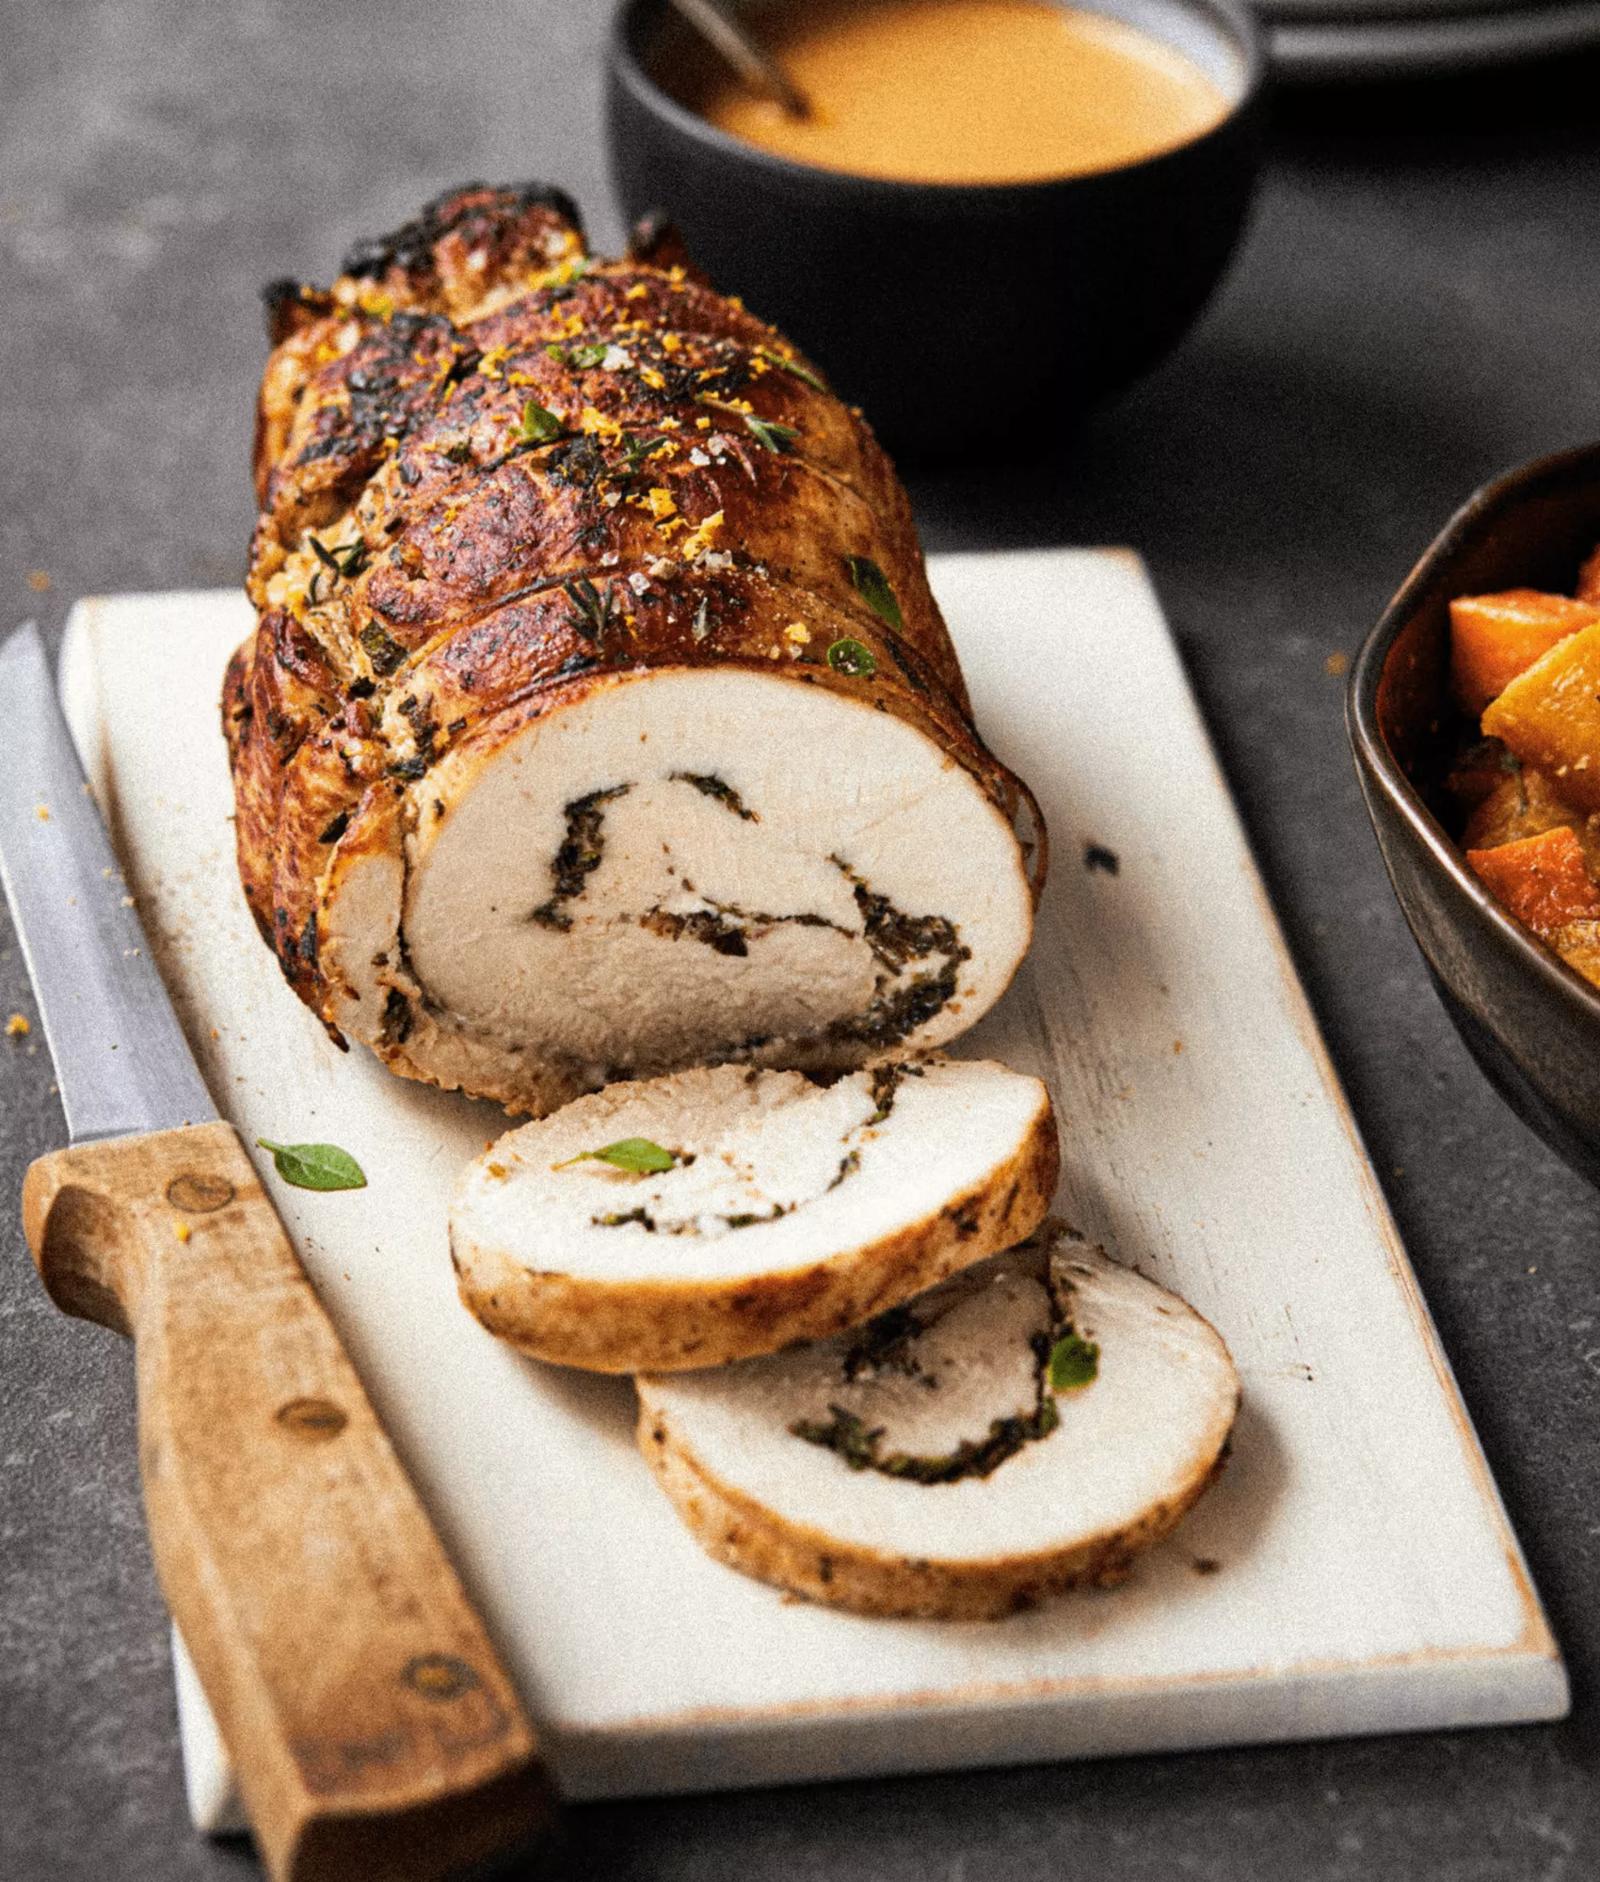 Roasted Turkey Breast with Herbs, Honey and Goat Cheese